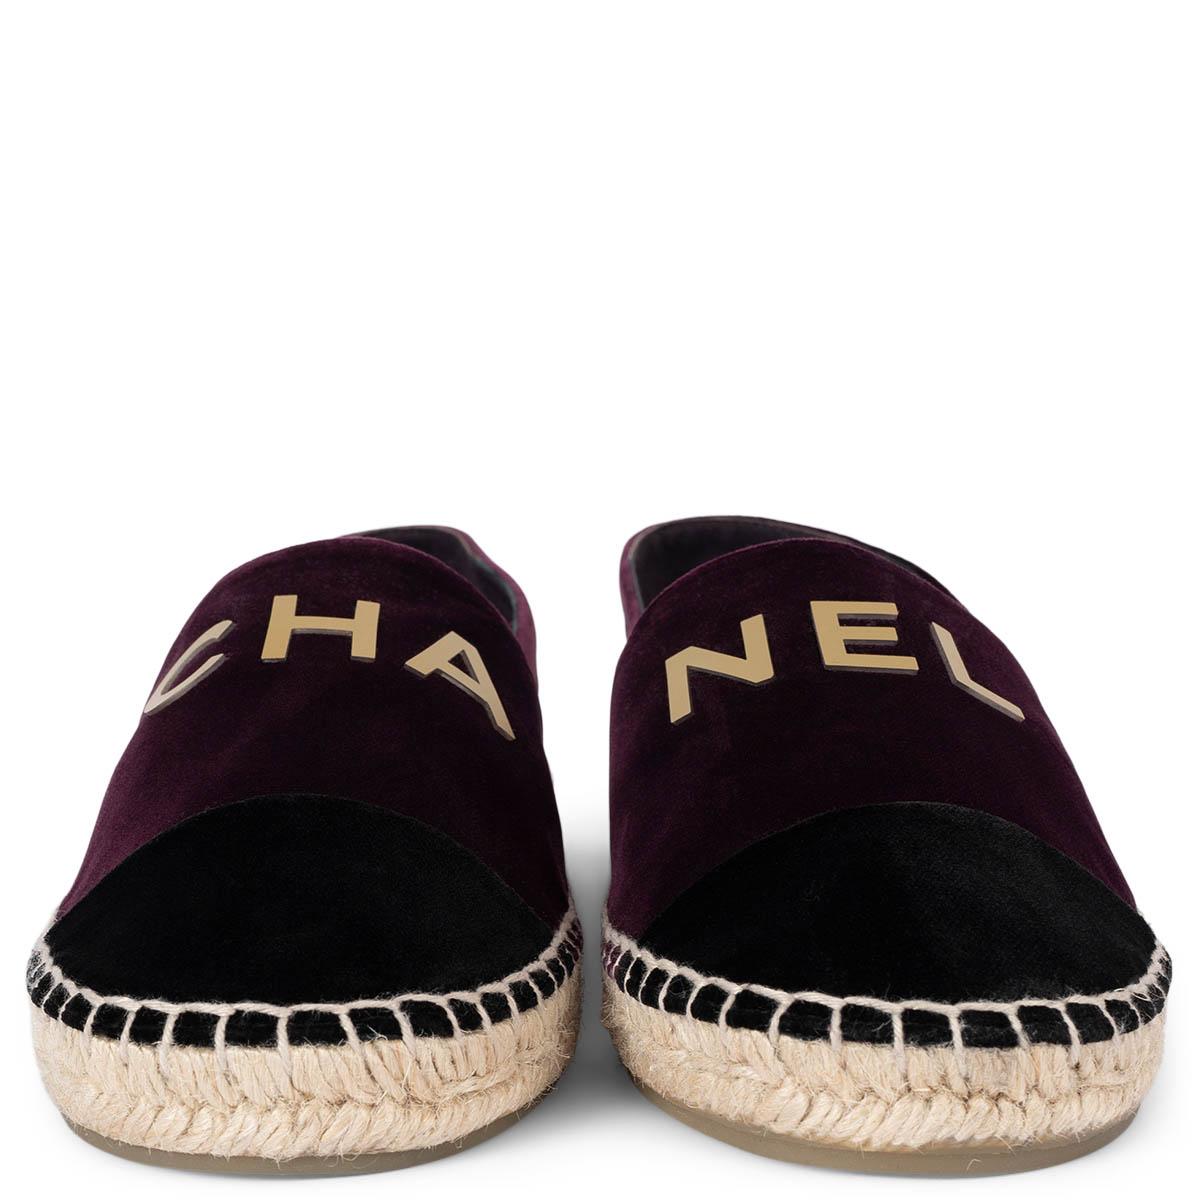 100% authentic Chanel espadrilles in purple and black velvet featuring gold-tone logo lettering. Leather lined. Band new. Come with dust bag and box. 

2018 Pre-Fall

Measurements
Model	18B G34012 X52059
Imprinted Size	37
Shoe Size	36.5
Inside